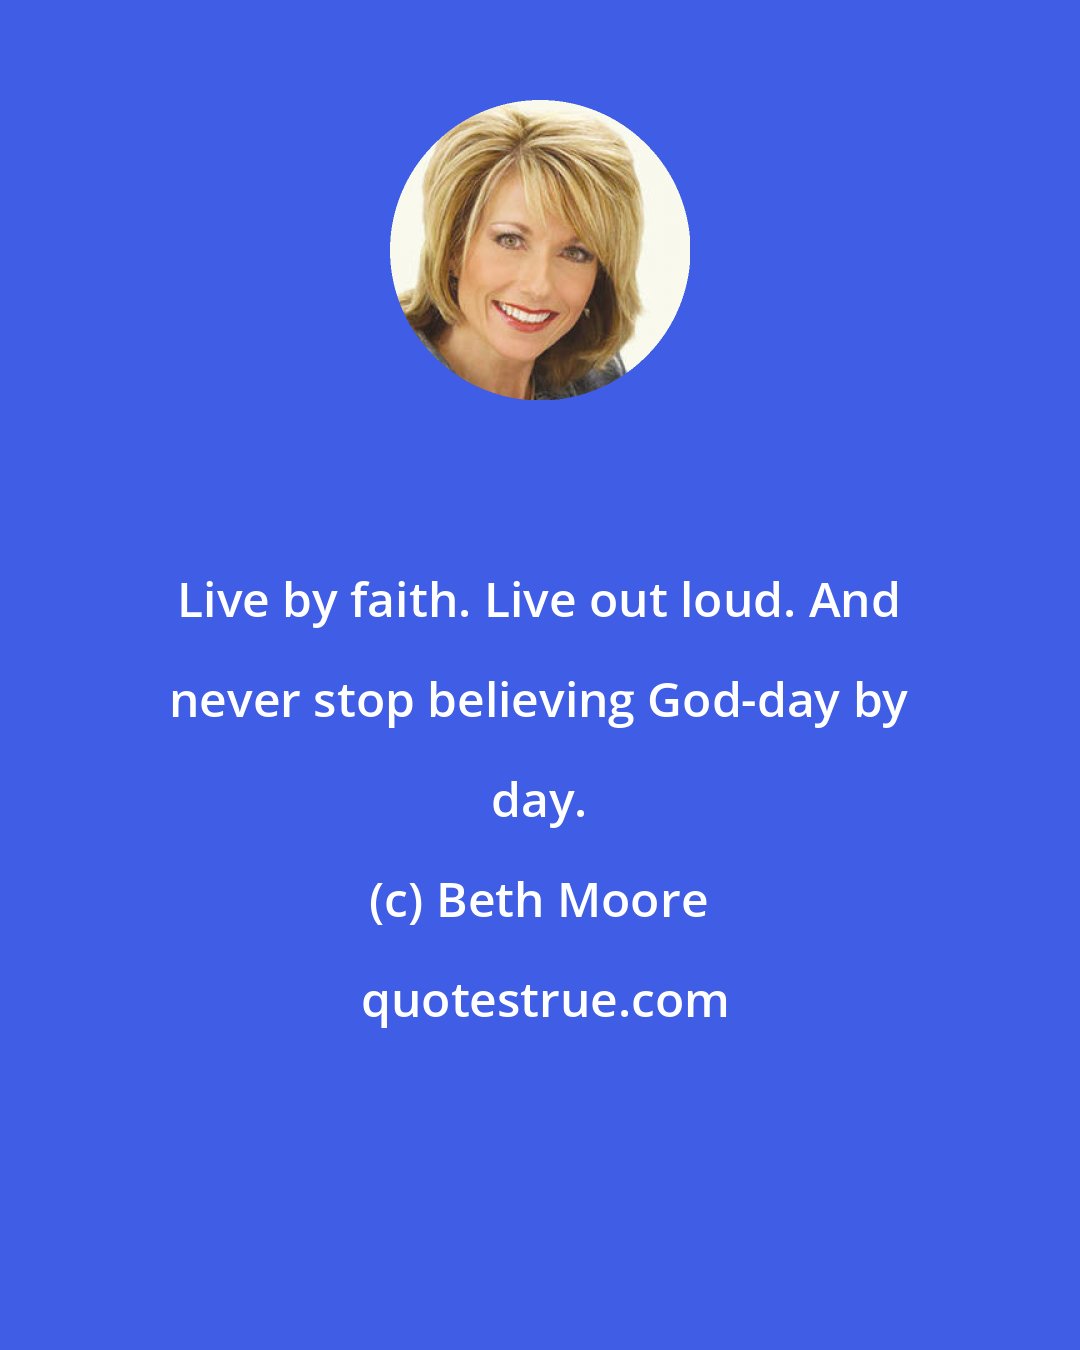 Beth Moore: Live by faith. Live out loud. And never stop believing God-day by day.